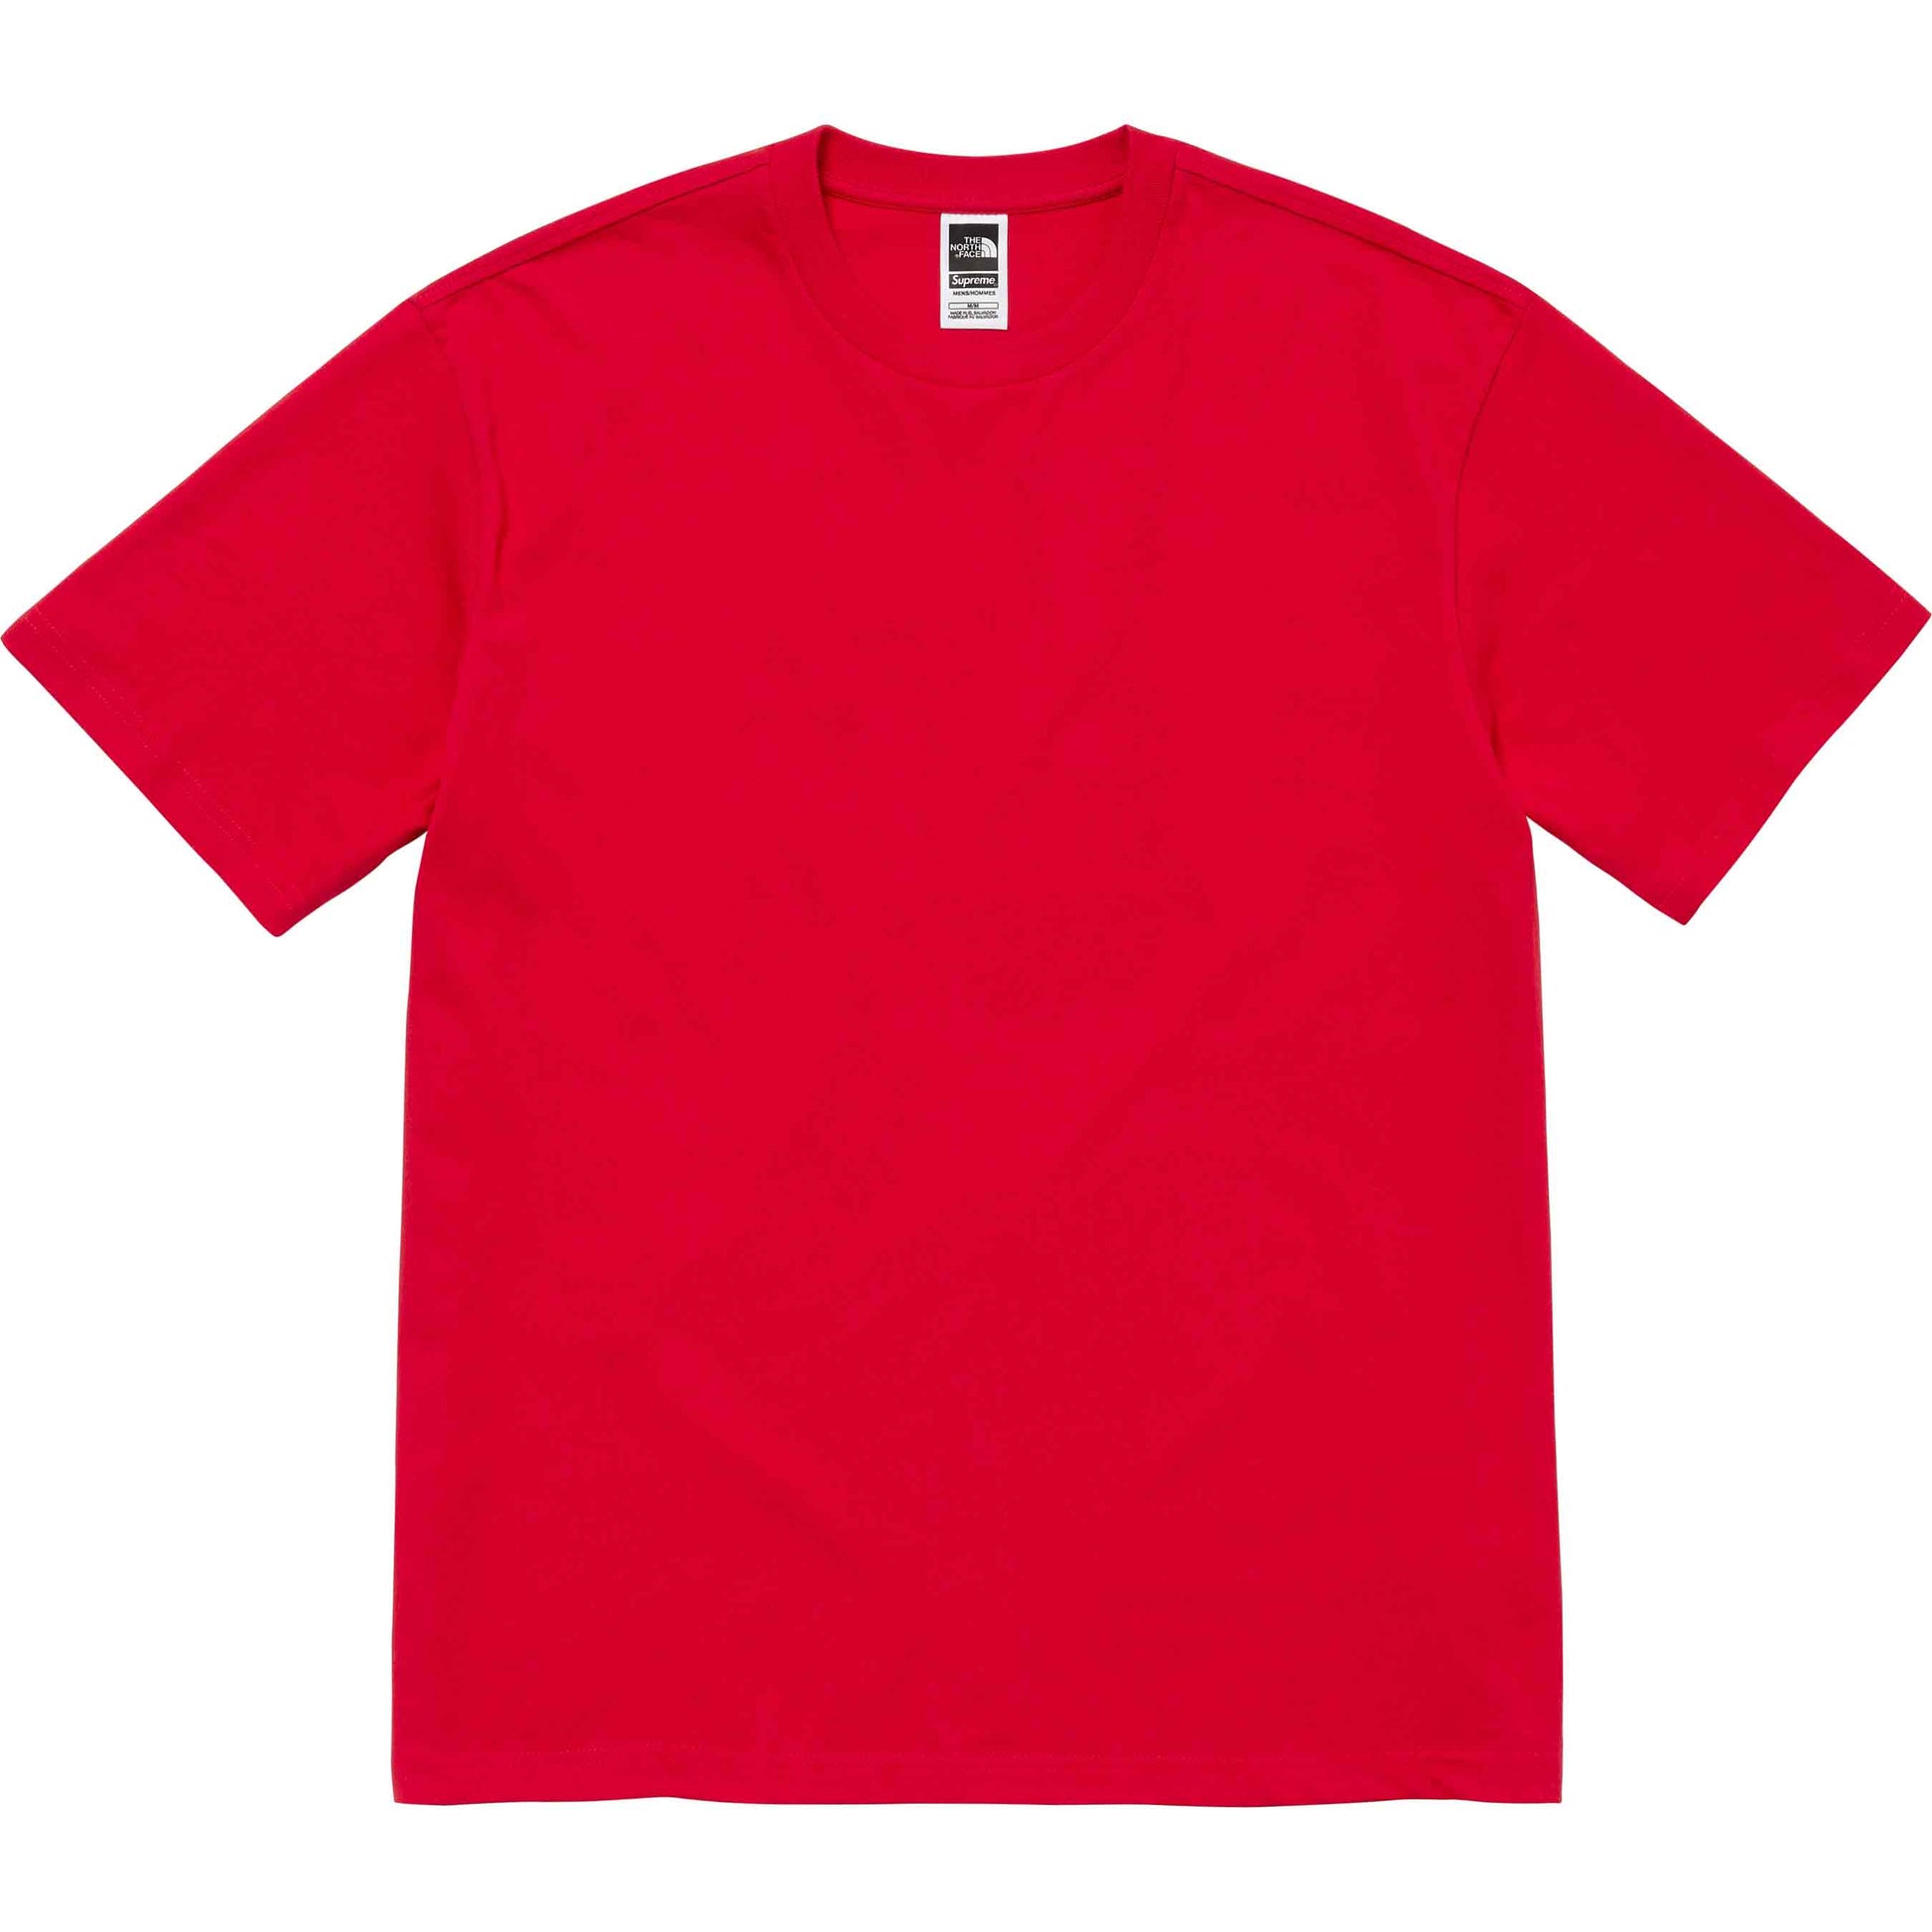 Supreme The North Face S/S Top Red by Supreme from £85.00